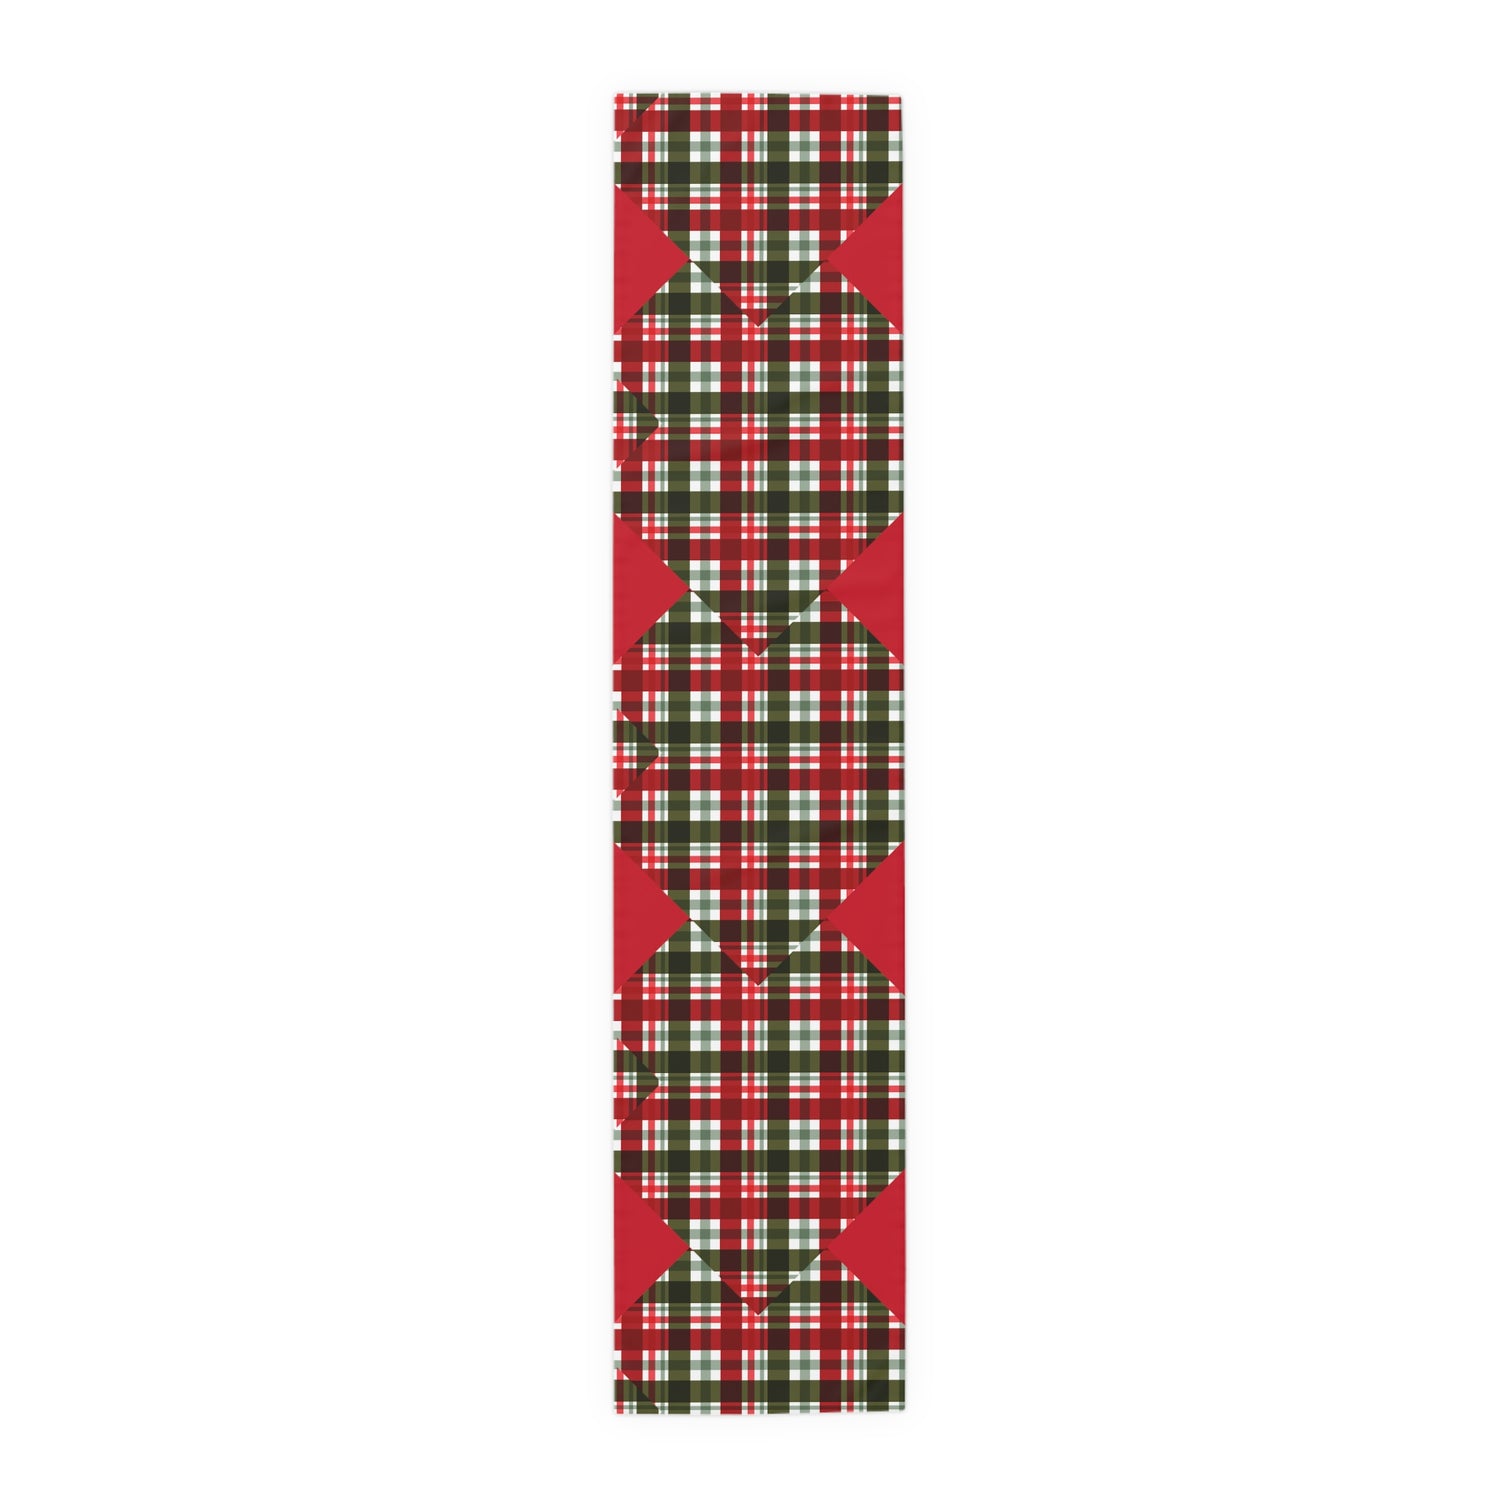 Table Runner (Cotton, Poly) Christmas pattern Home-clothes-jewelry